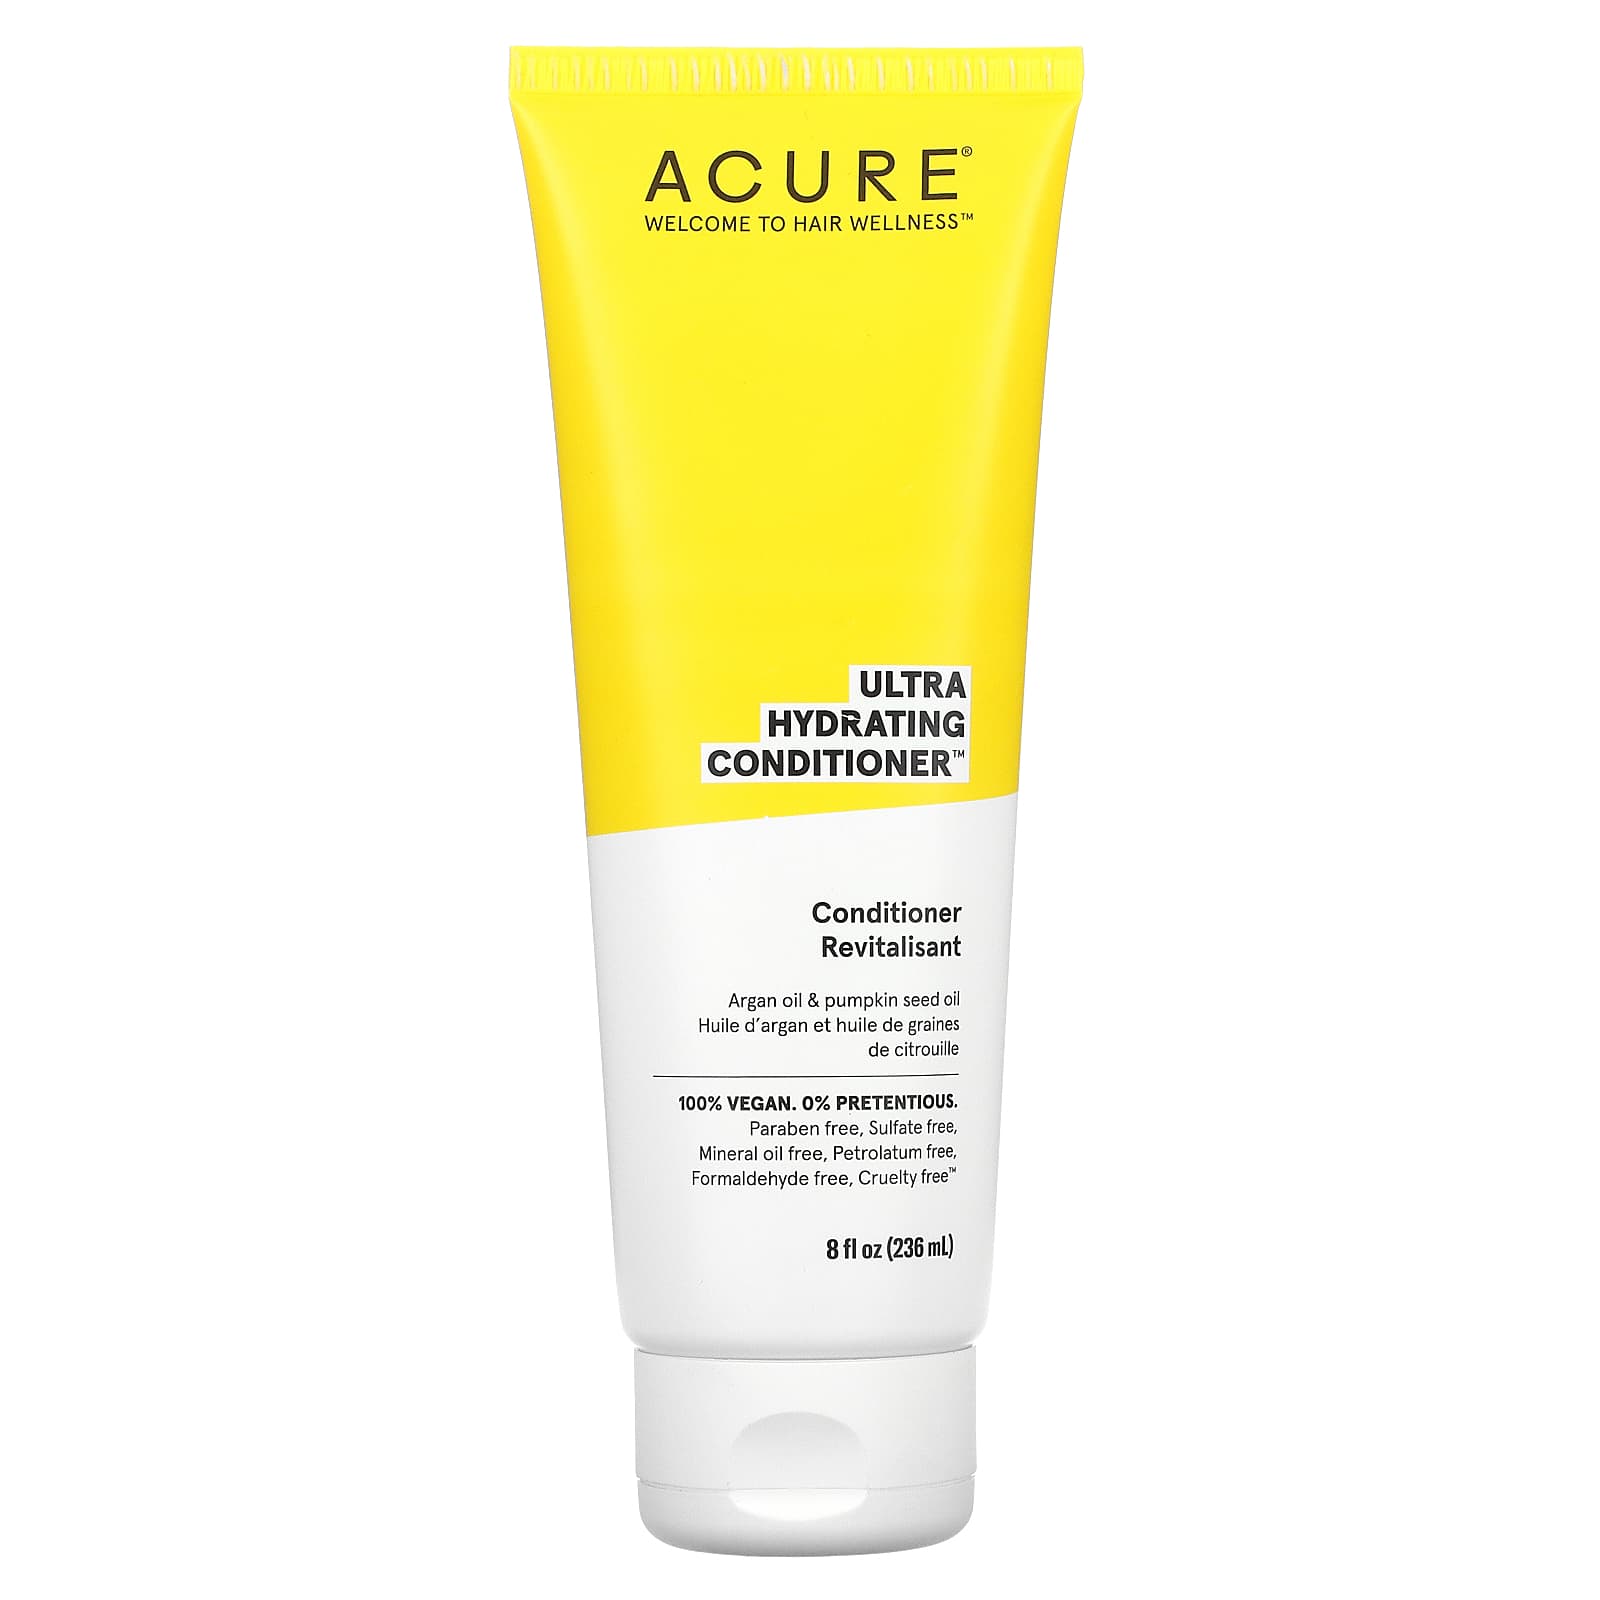 Acure ultra hydrating conditioner price in UAE